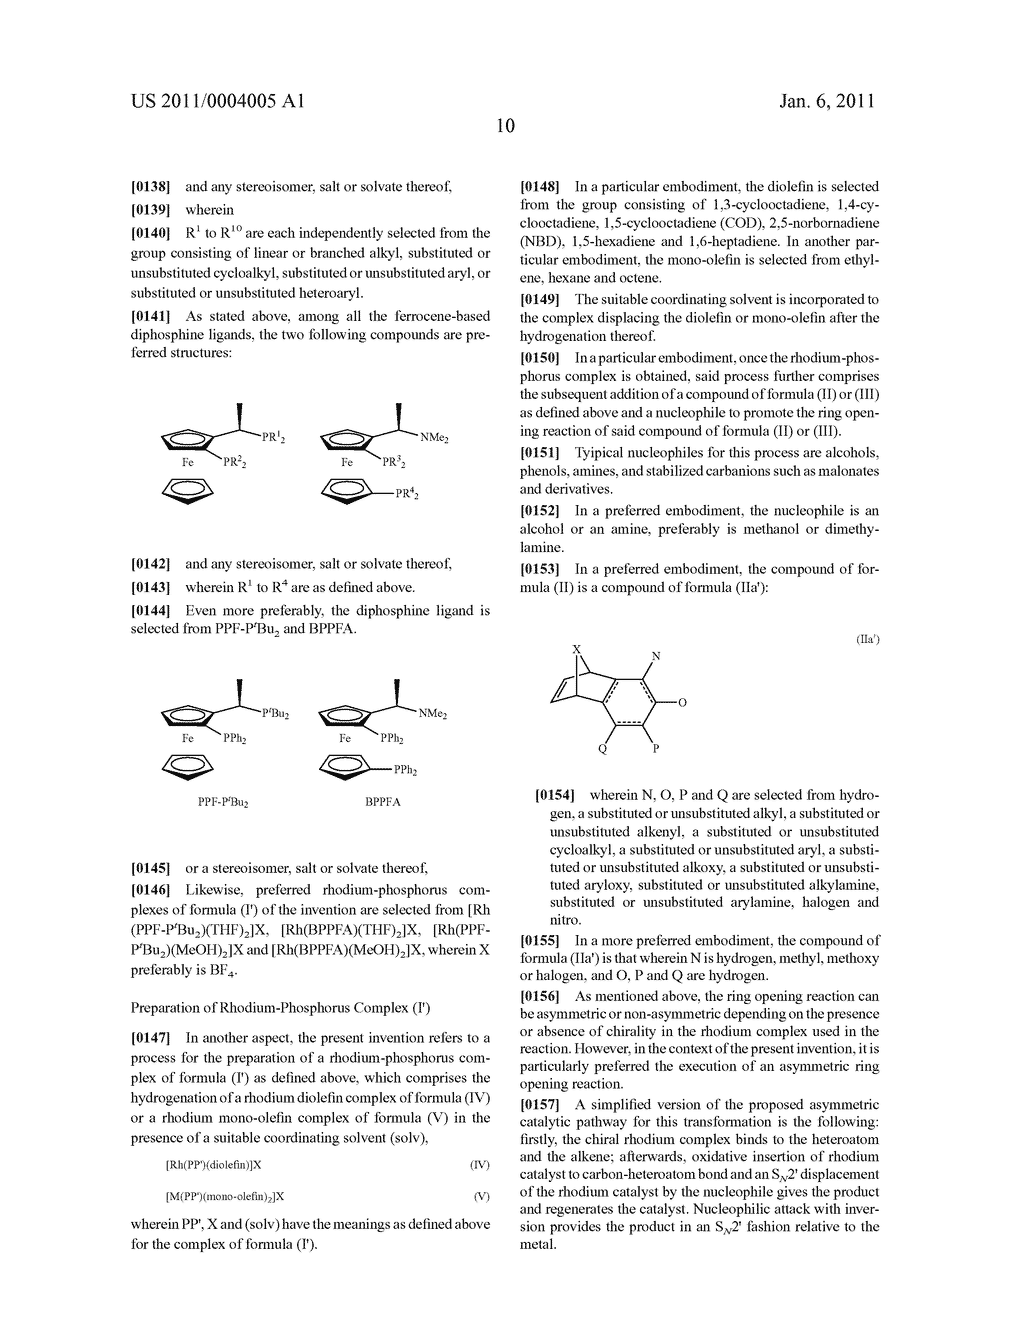 RHODIUM-PHOSPHORUS COMPLEXES AND THEIR USE IN RING OPENING REACTIONS - diagram, schematic, and image 12